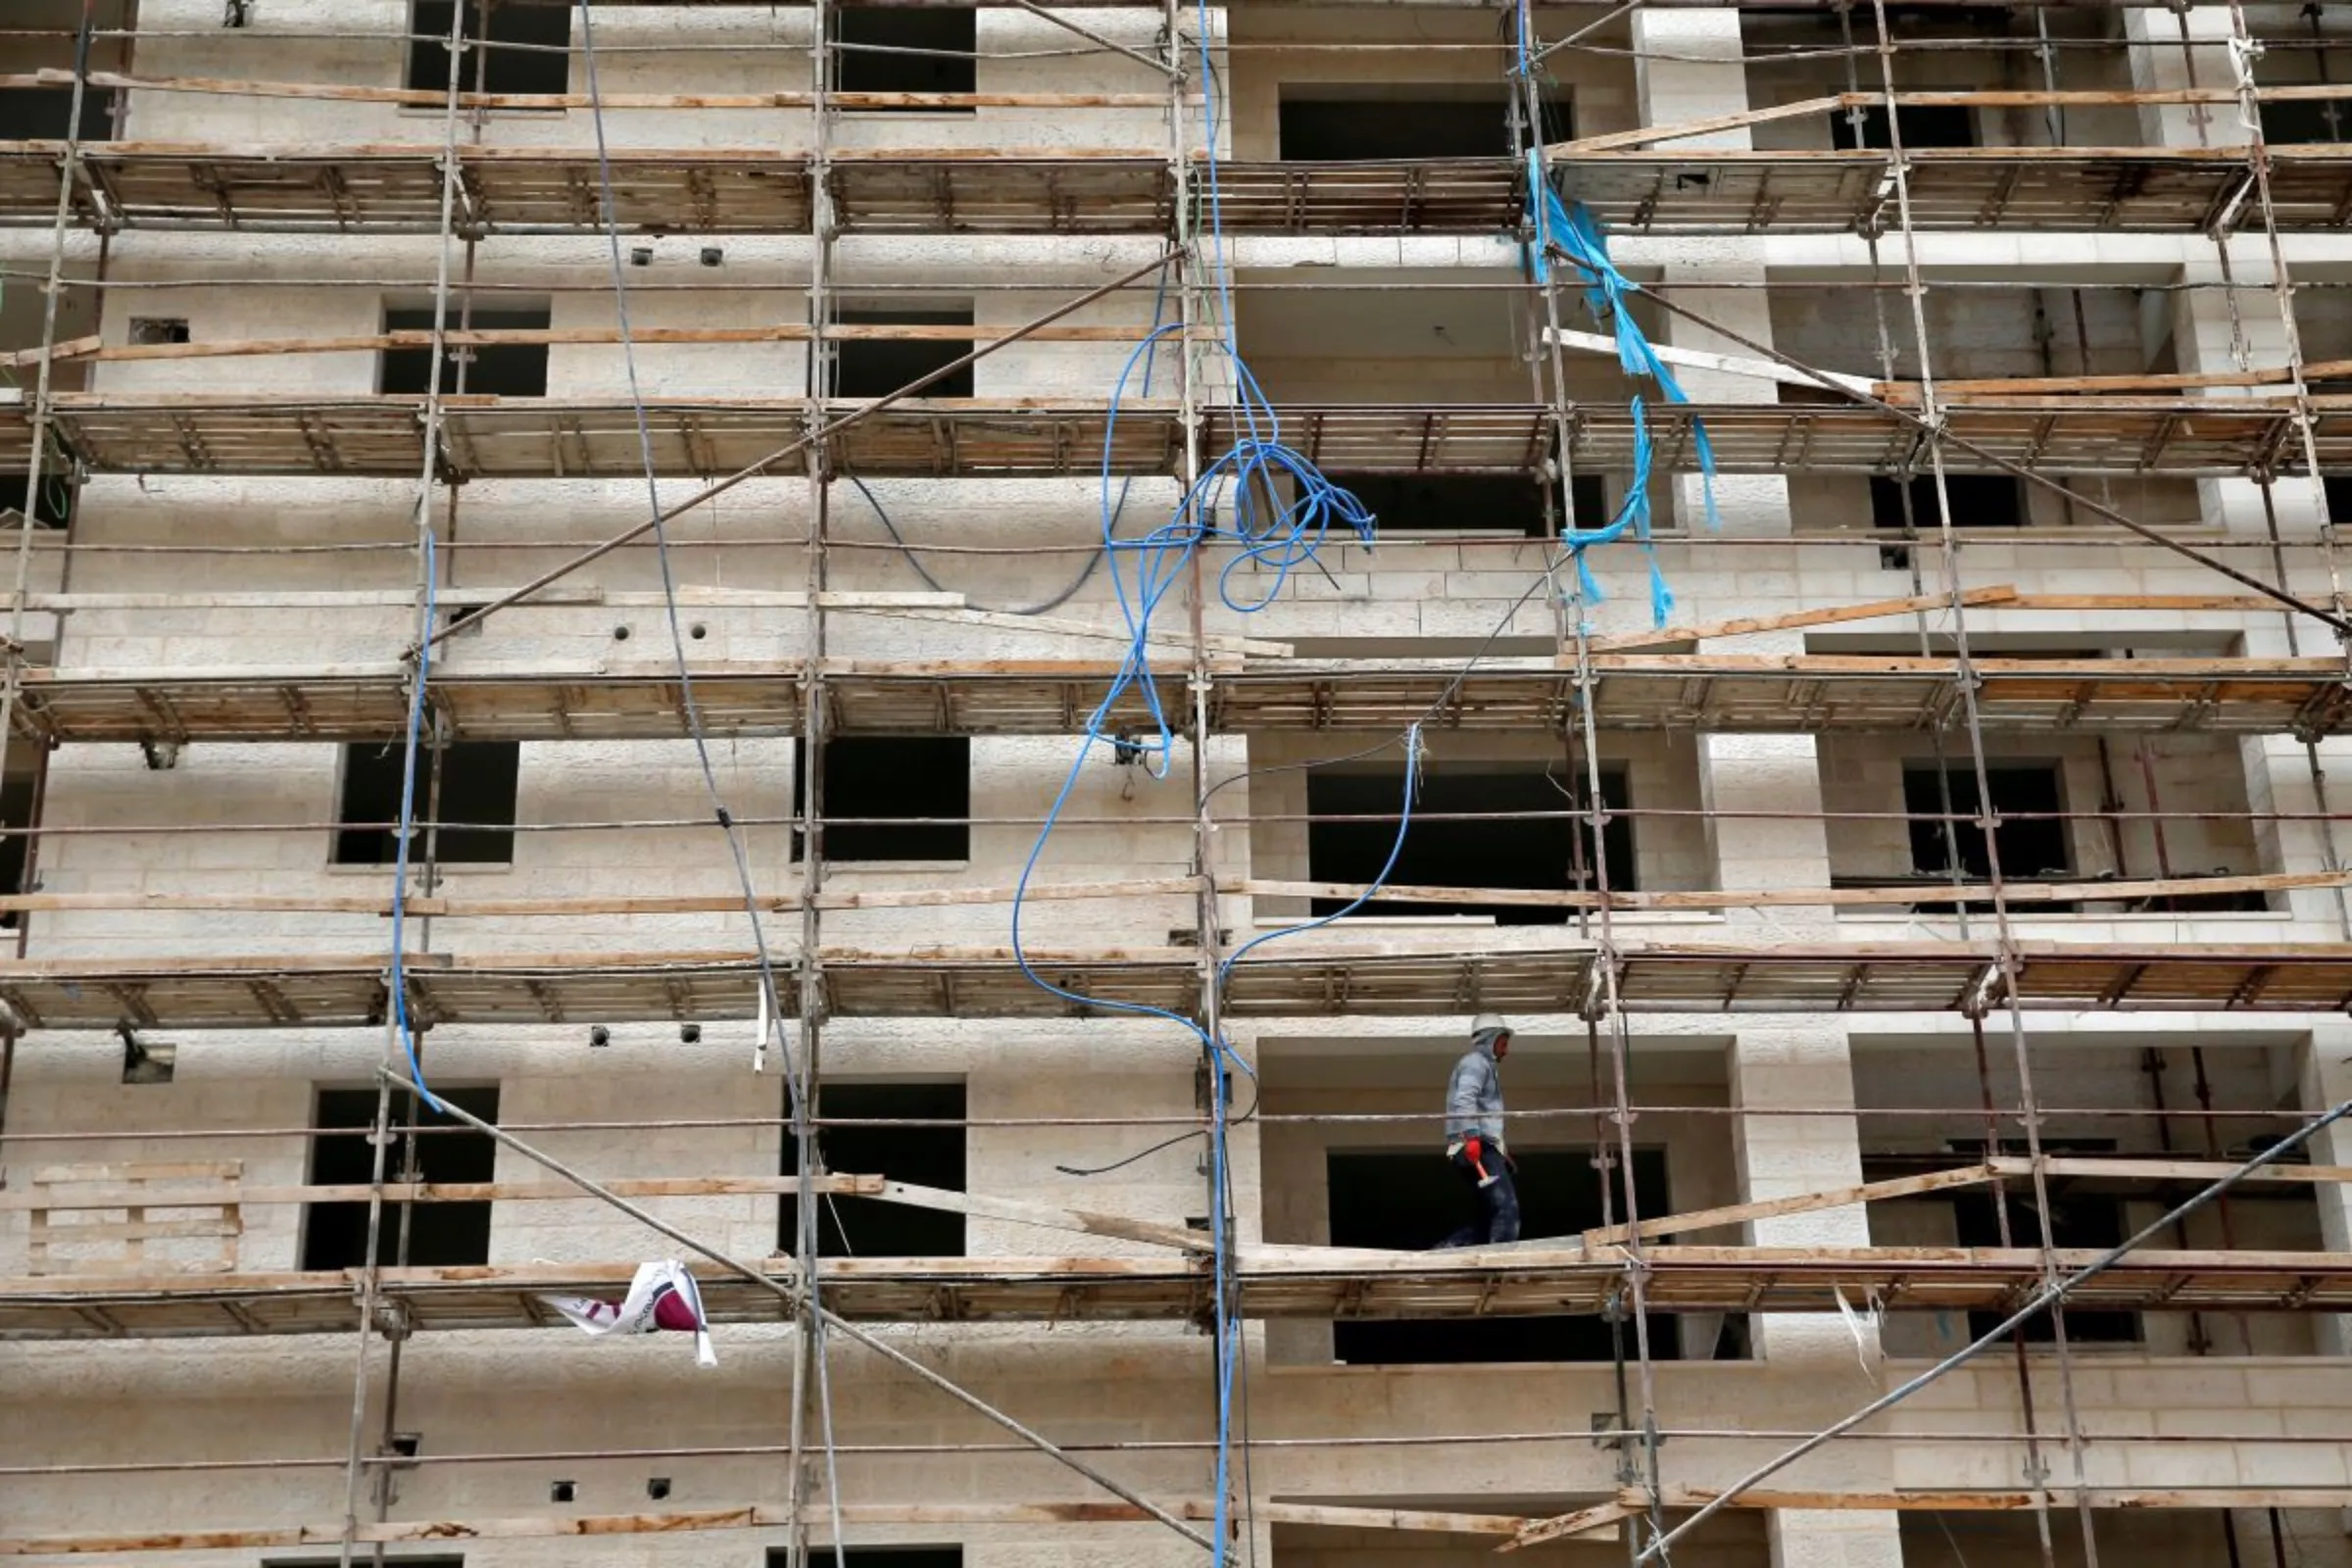 A worker walks on scaffoldings in a construction site at the Israeli settlement of Har Homa, in the occupied West Bank December 28, 2016. REUTERS/Baz Ratner